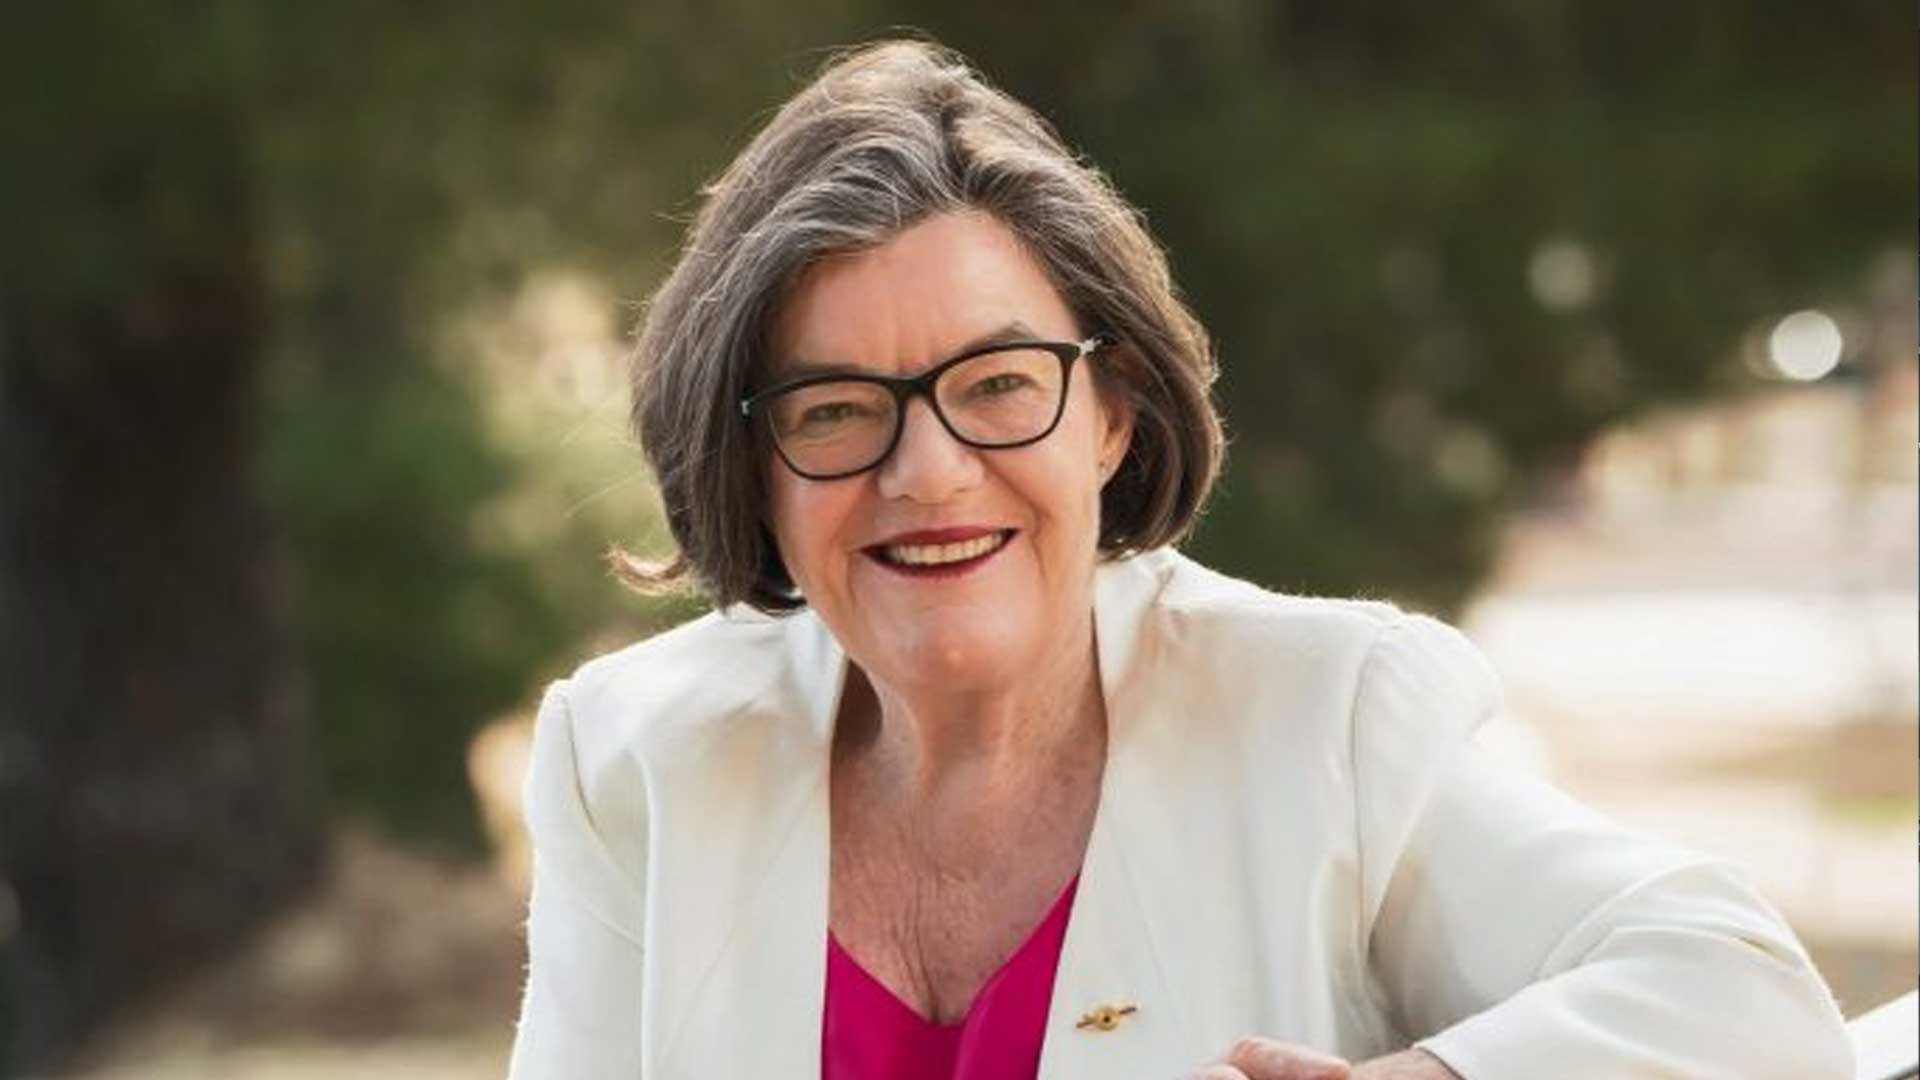 Cathy McGowan wearing a white jacket and smiling